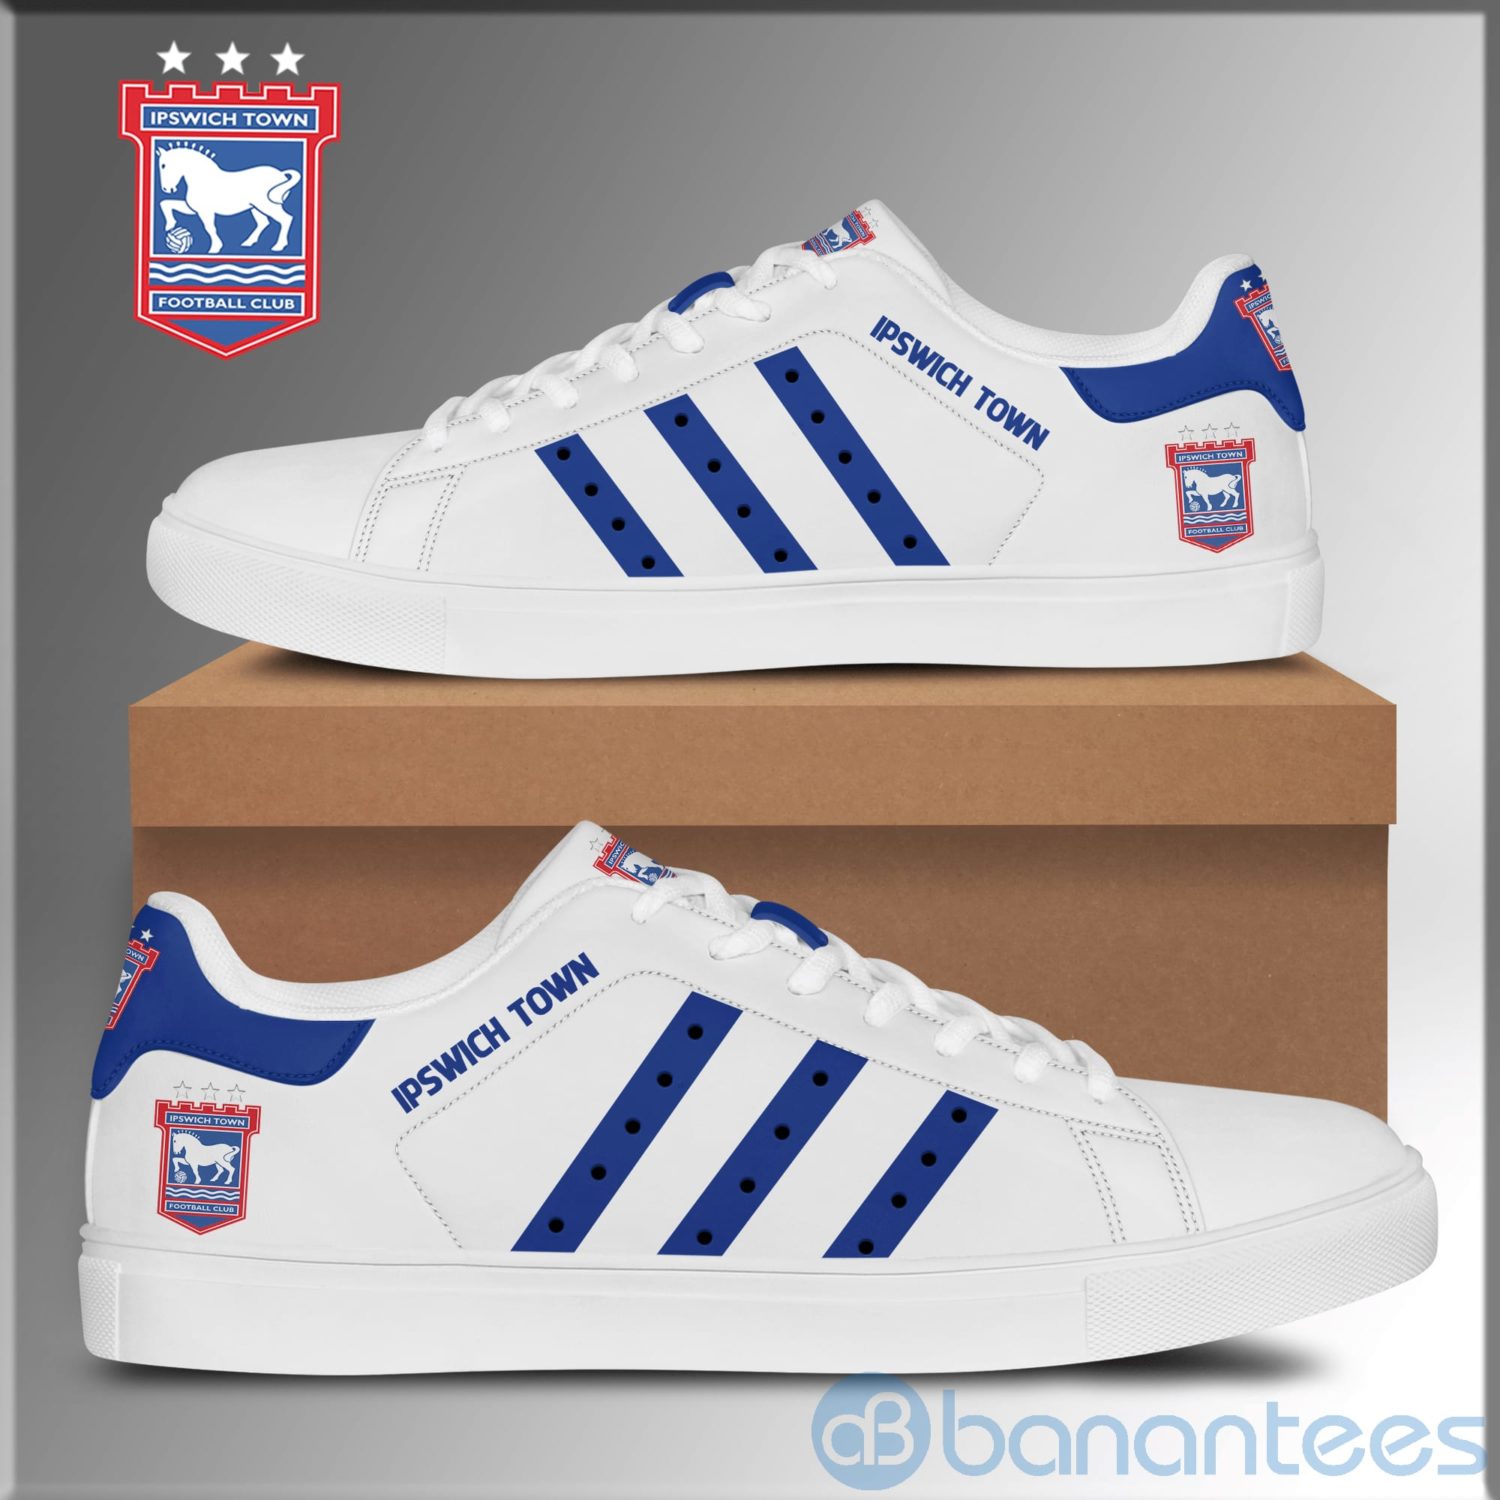 Ipstown Football Blue Striped Low Top Skate Shoes